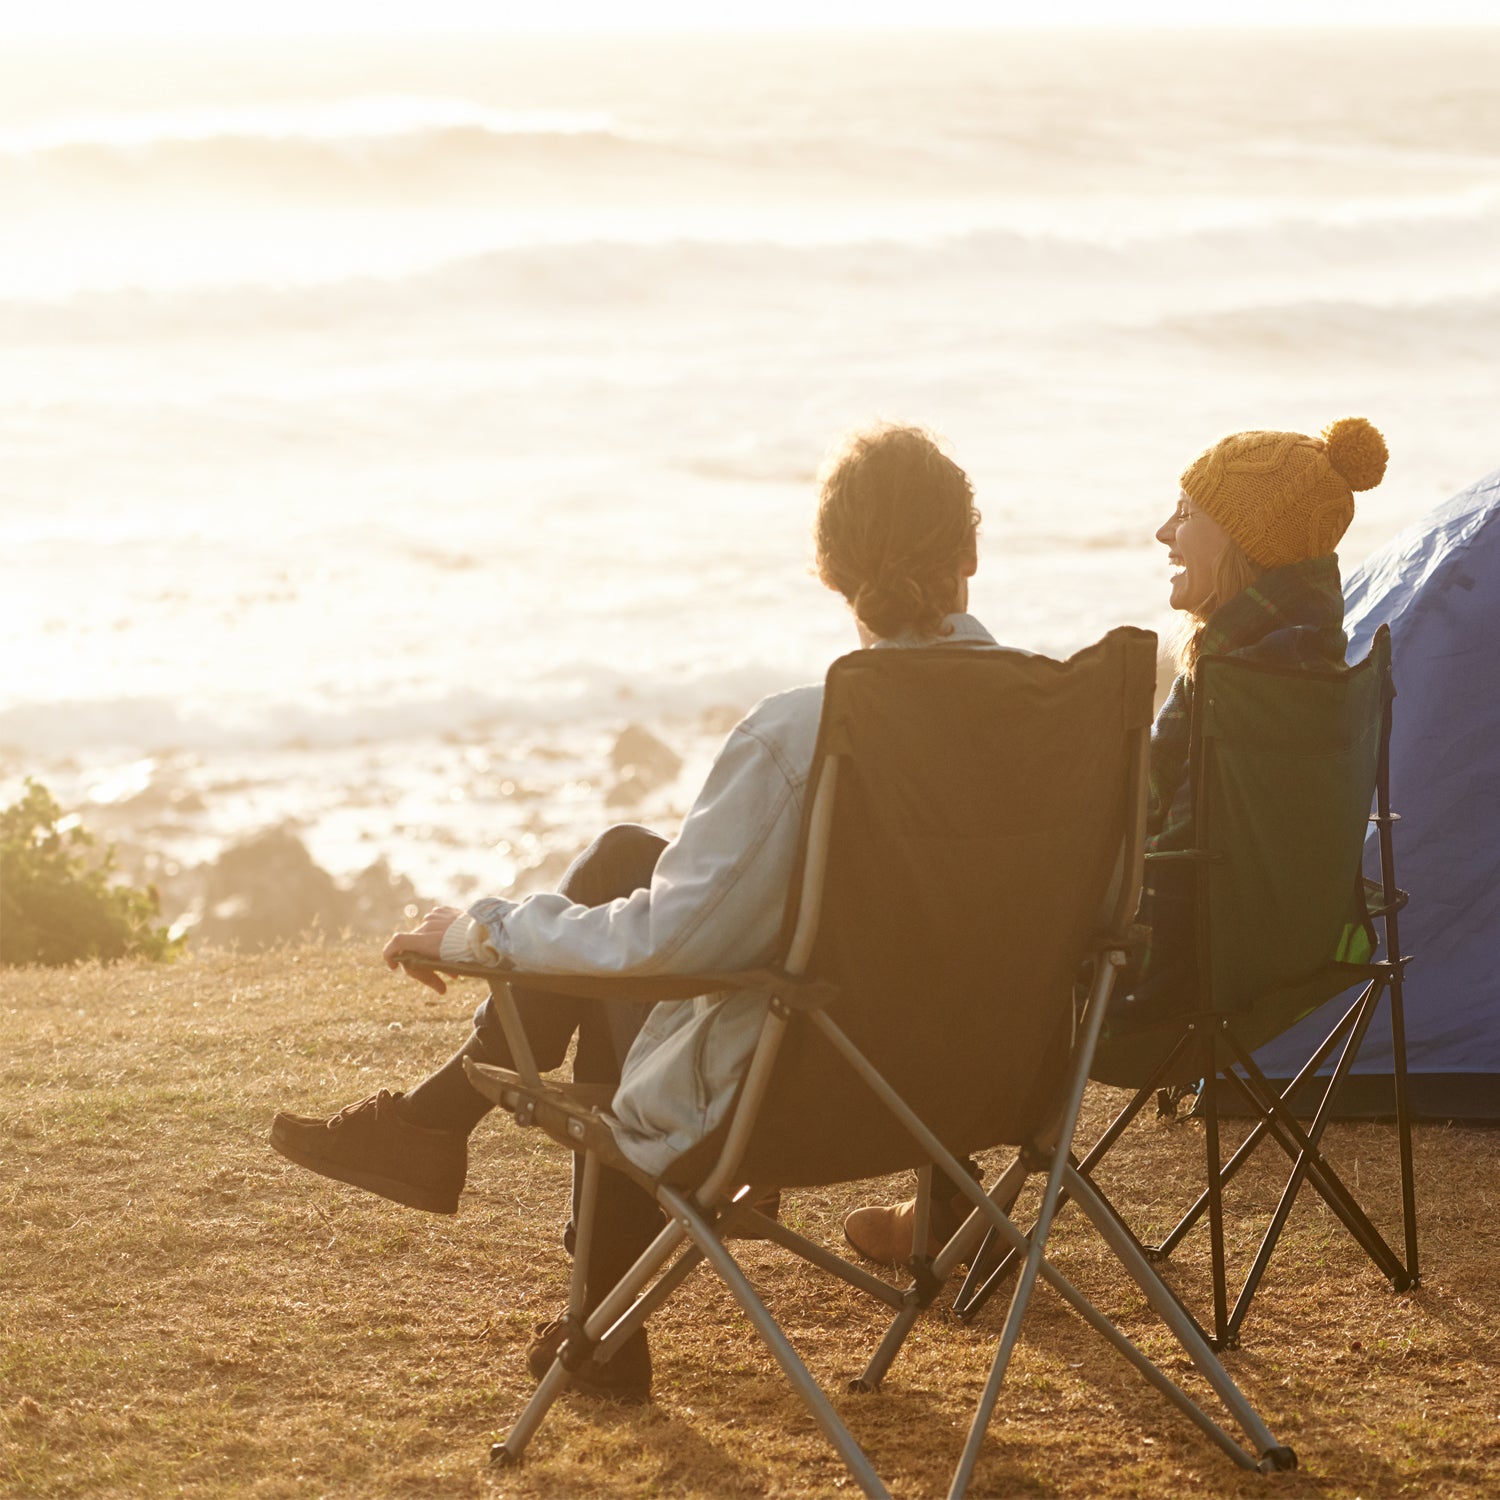 The Best Camp Chairs, According to You